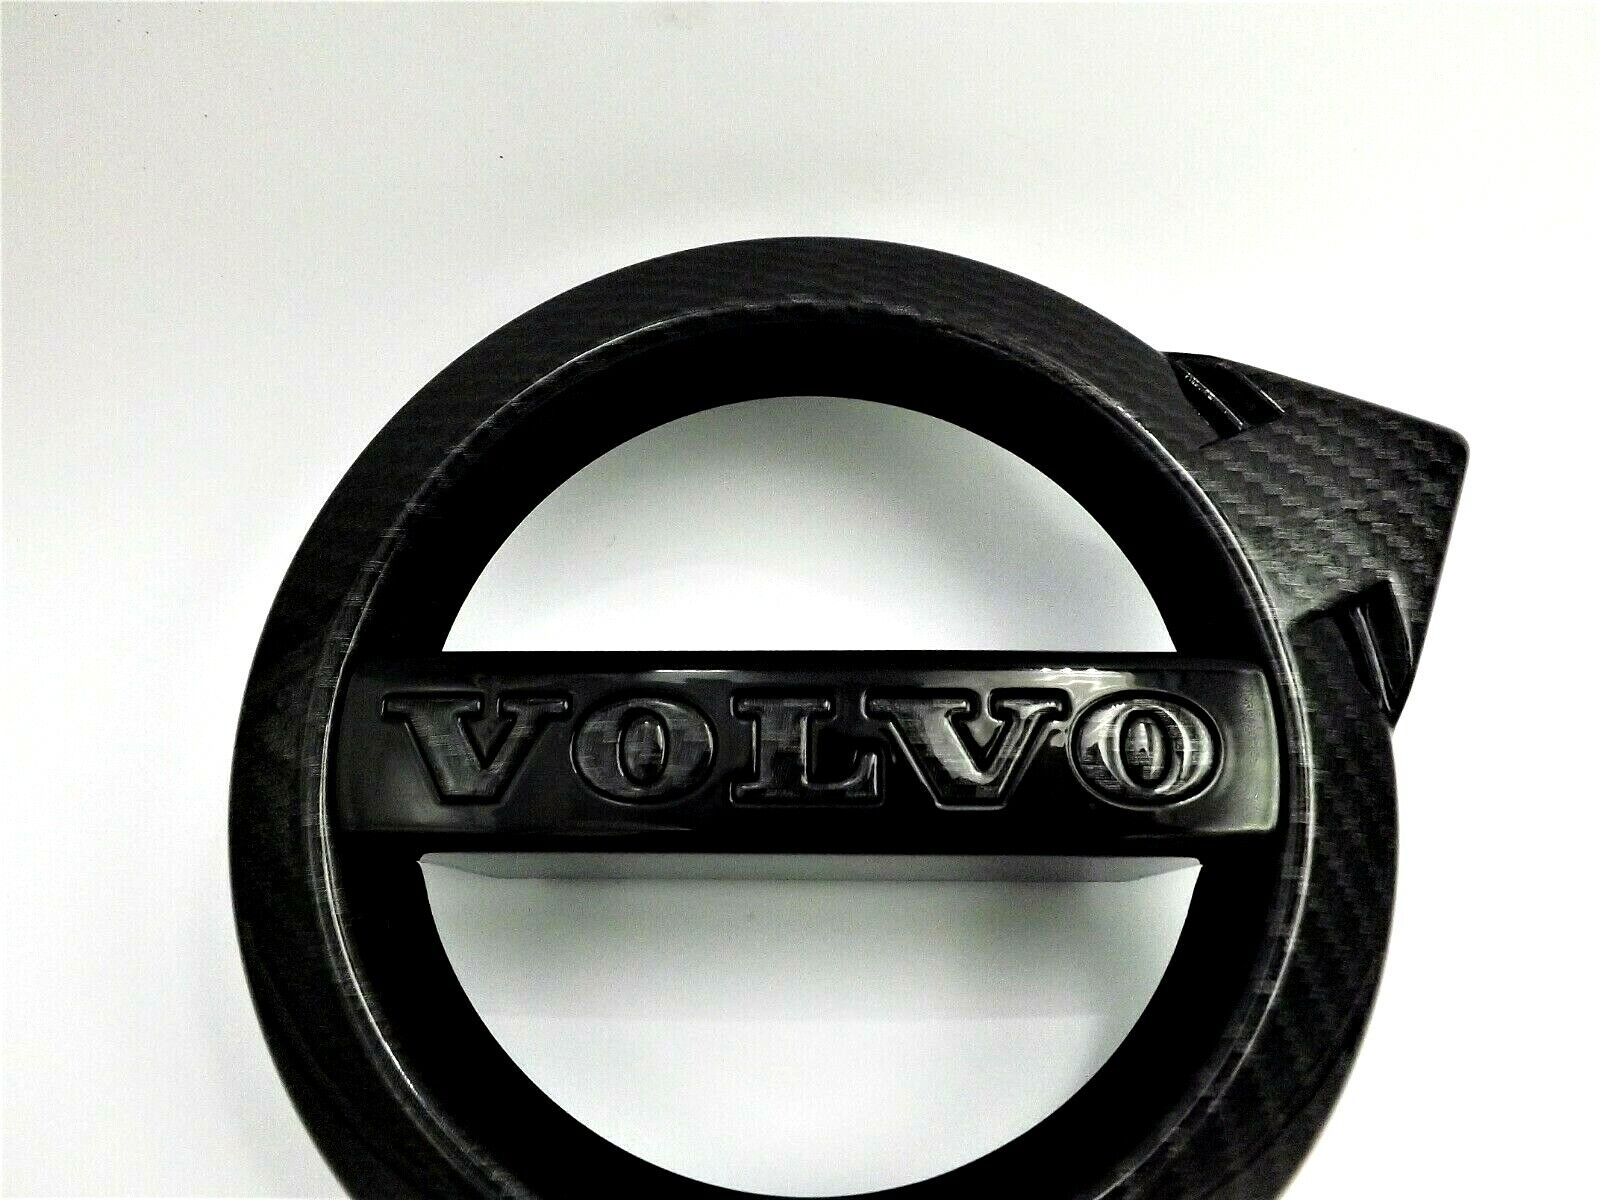 Volvox90volvo Door Lock Covers - Stainless Steel Emblems For Xc90